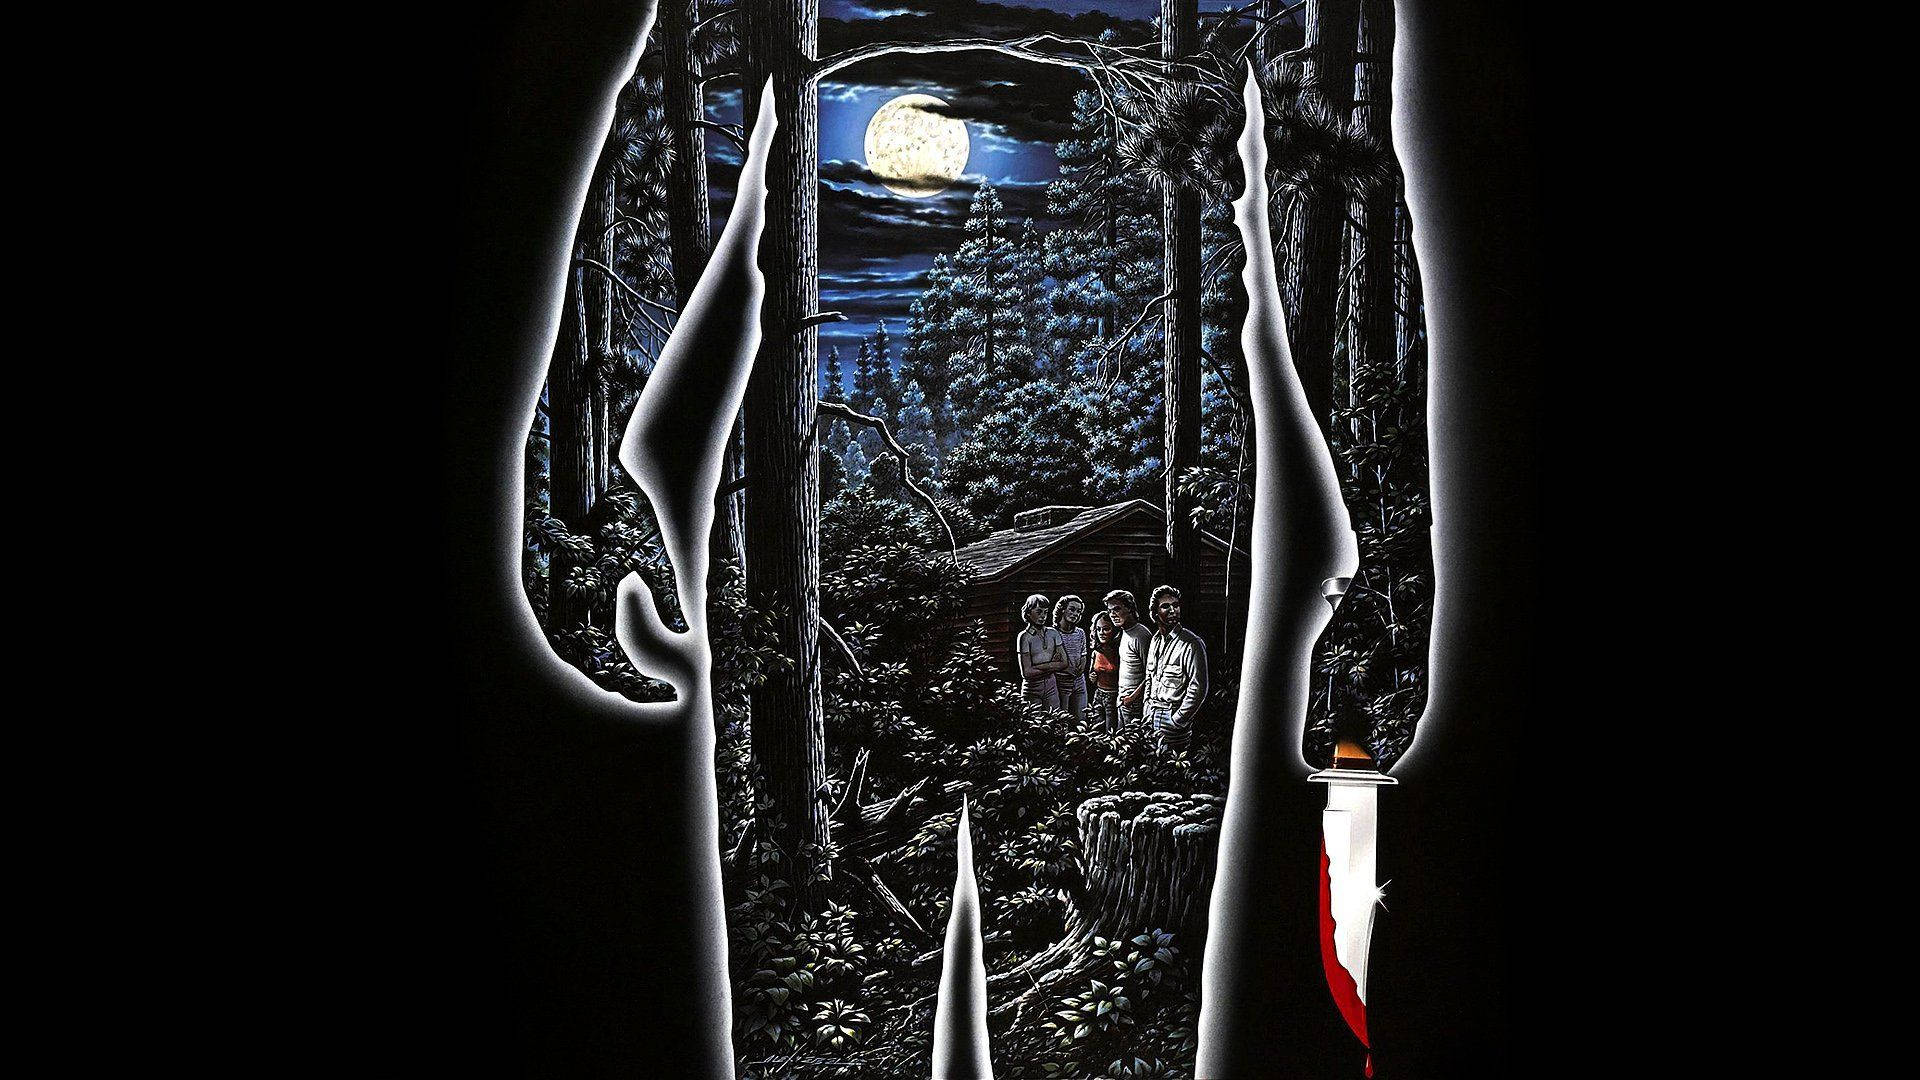 First Poster Of Friday The 13th